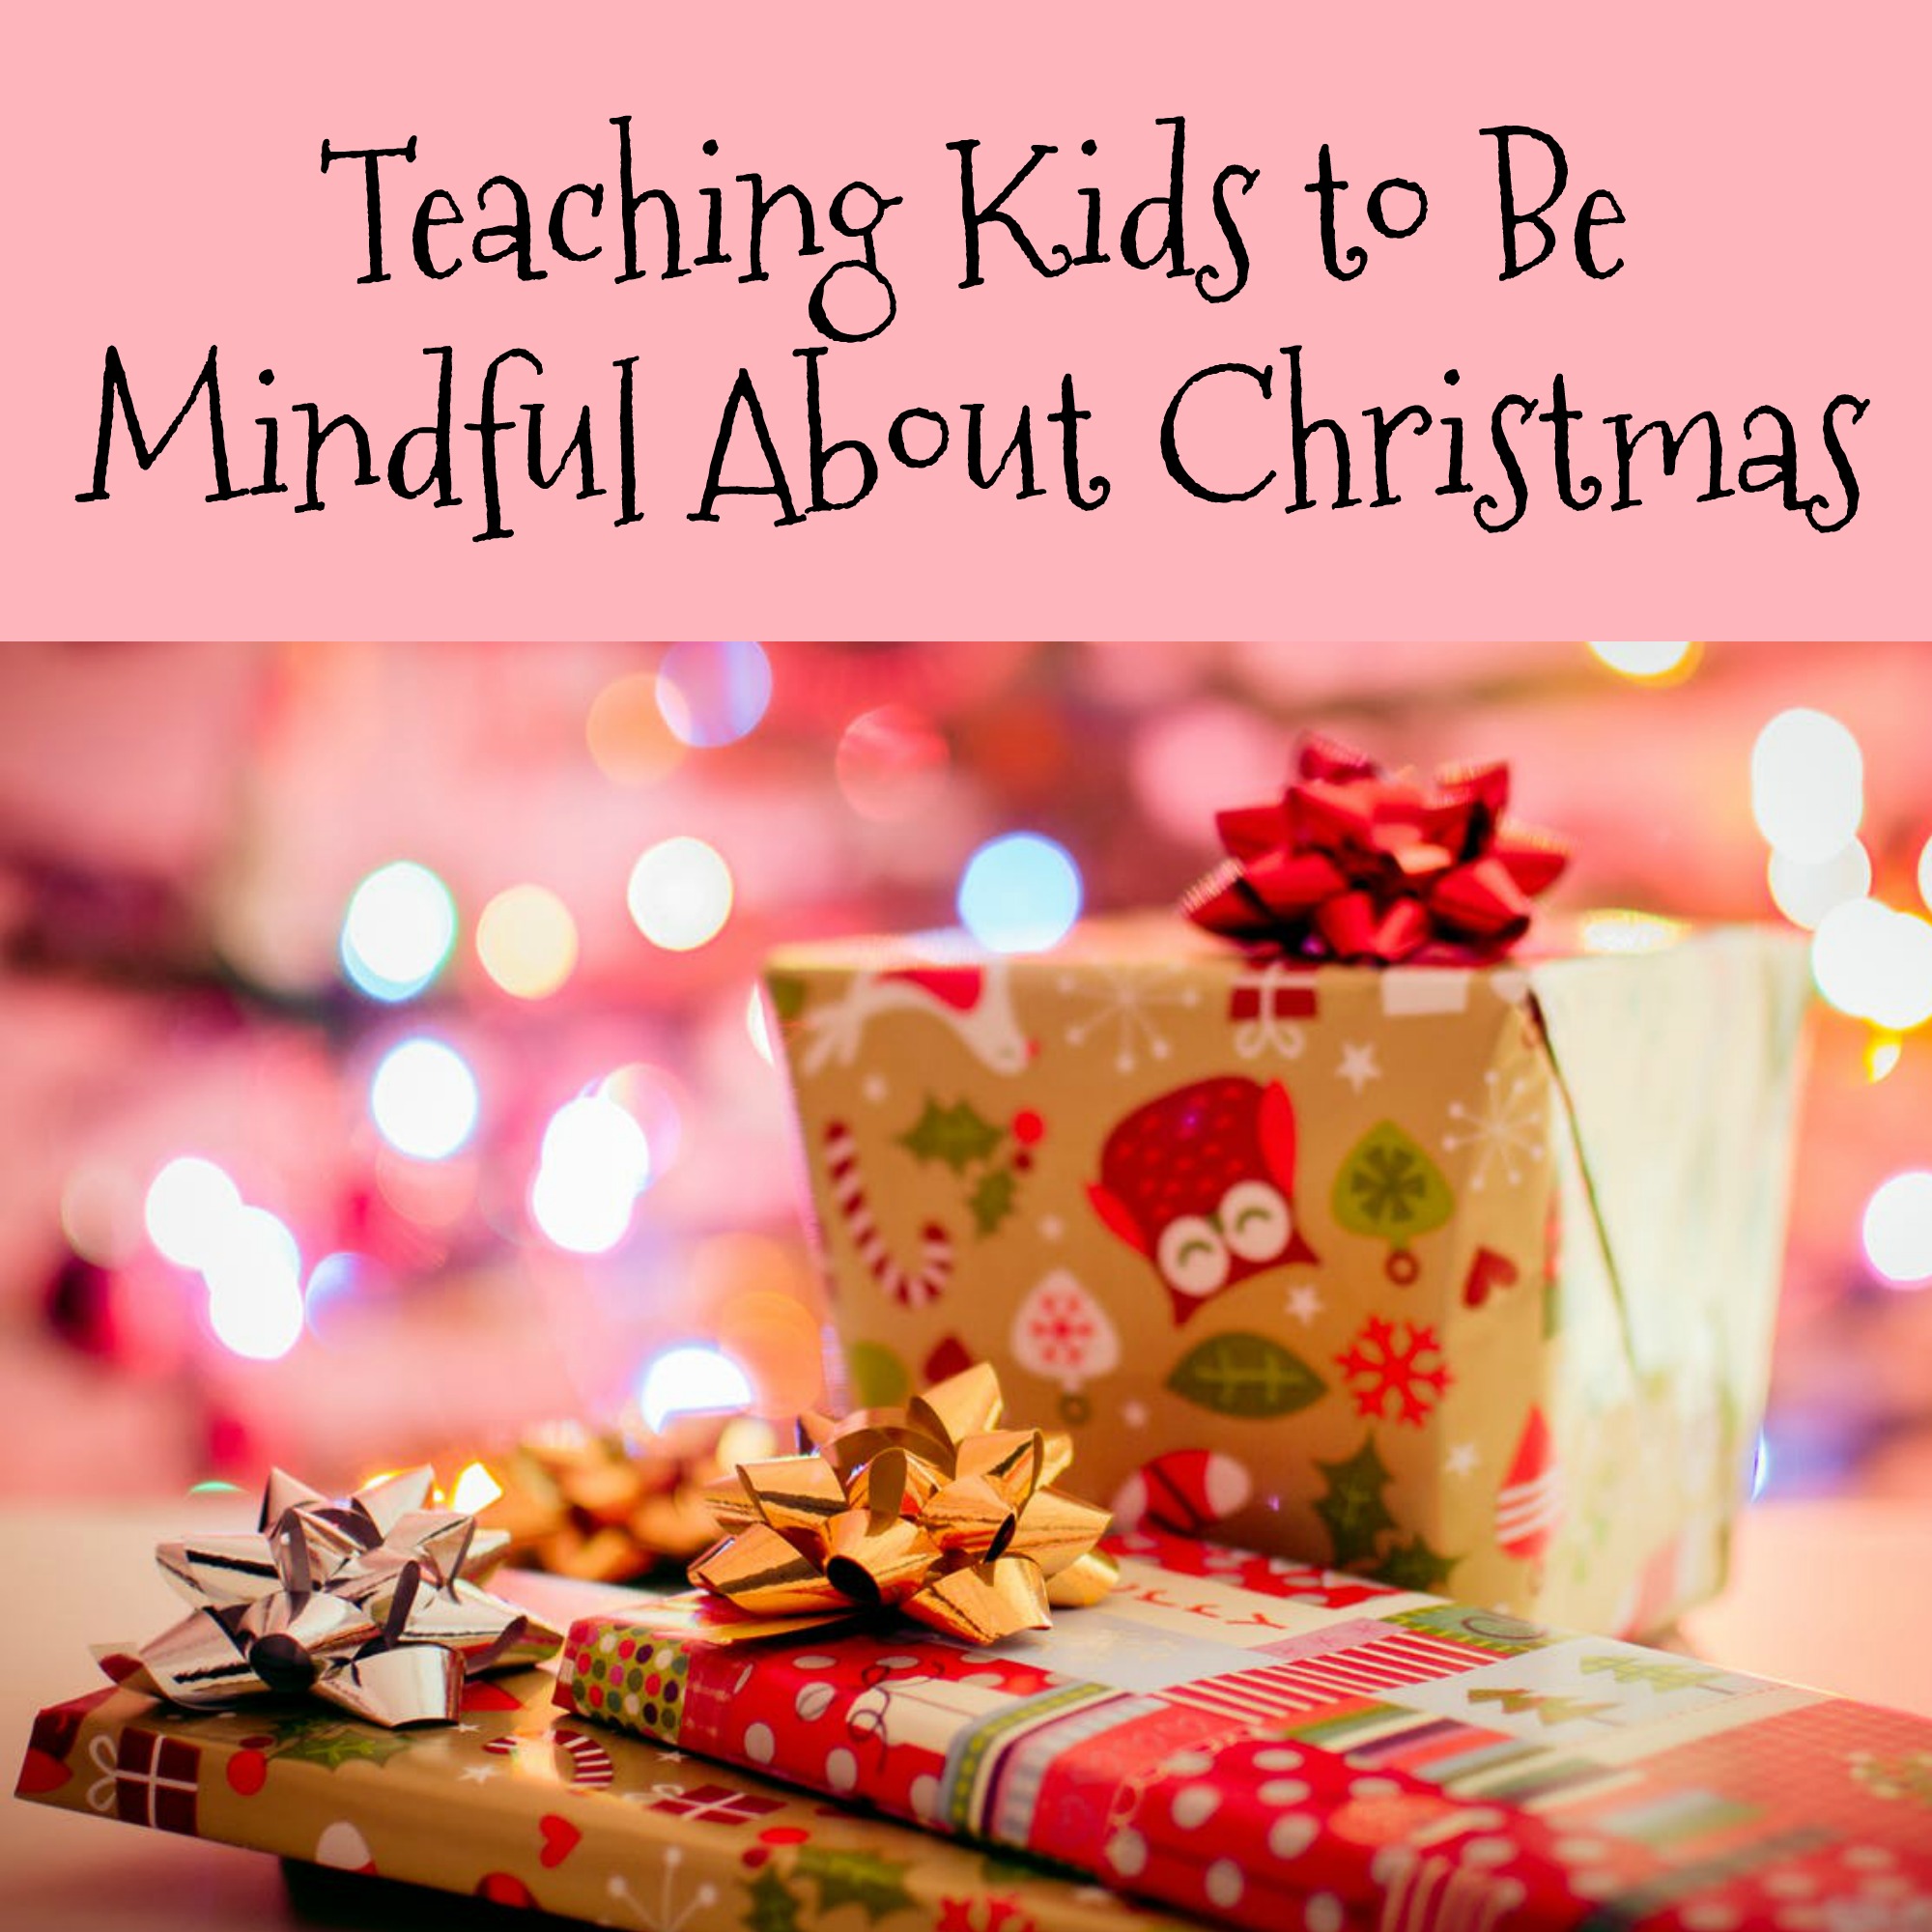 Teaching Kids to Be Mindful About Christmas